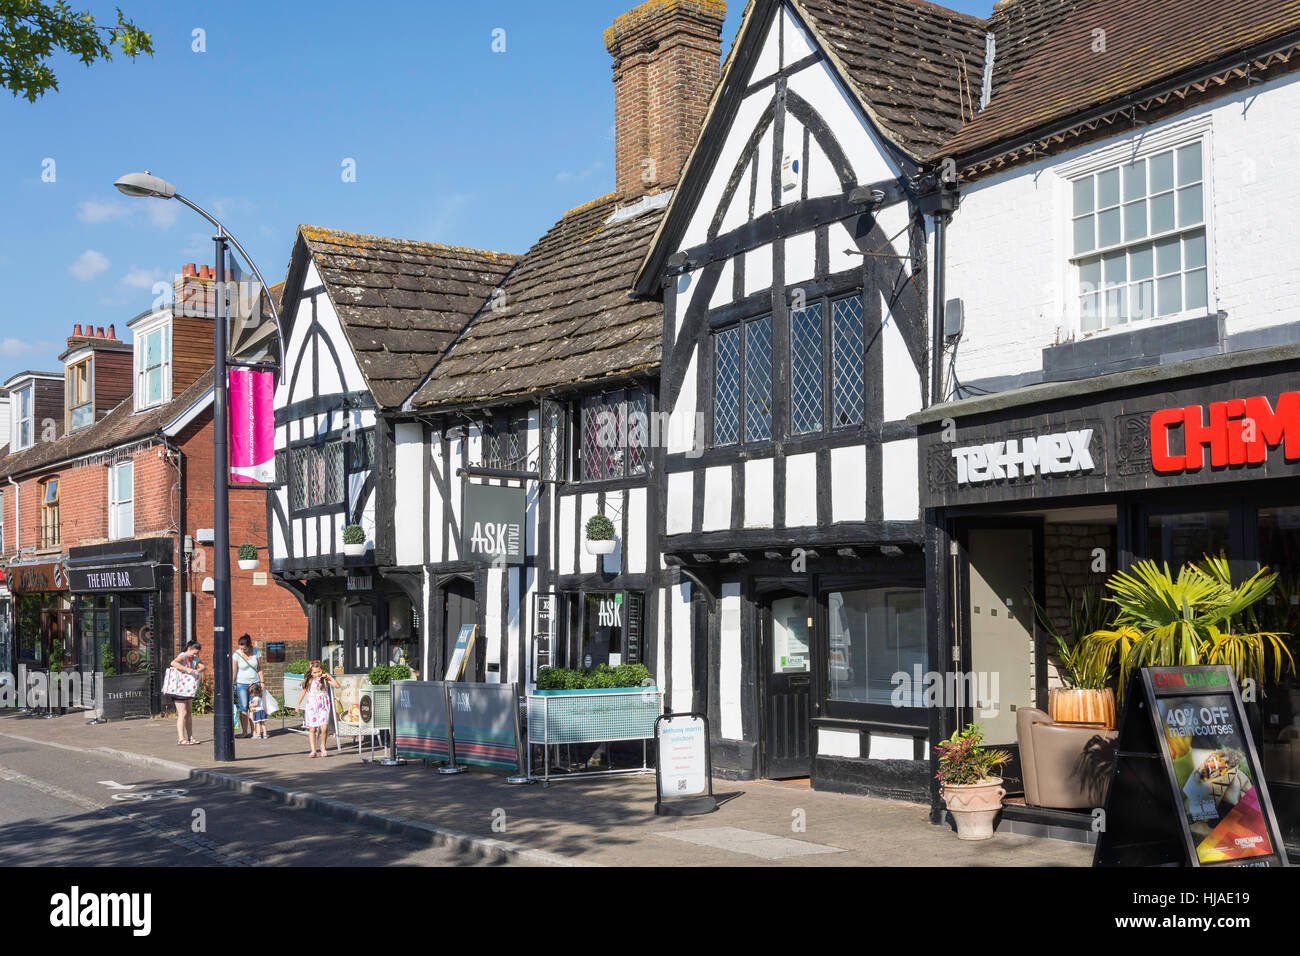 Ask Italian restaurant in 15th century timber-framed building, High Street, Crawley, West Sussex, England, United Kingdom Stock Photo